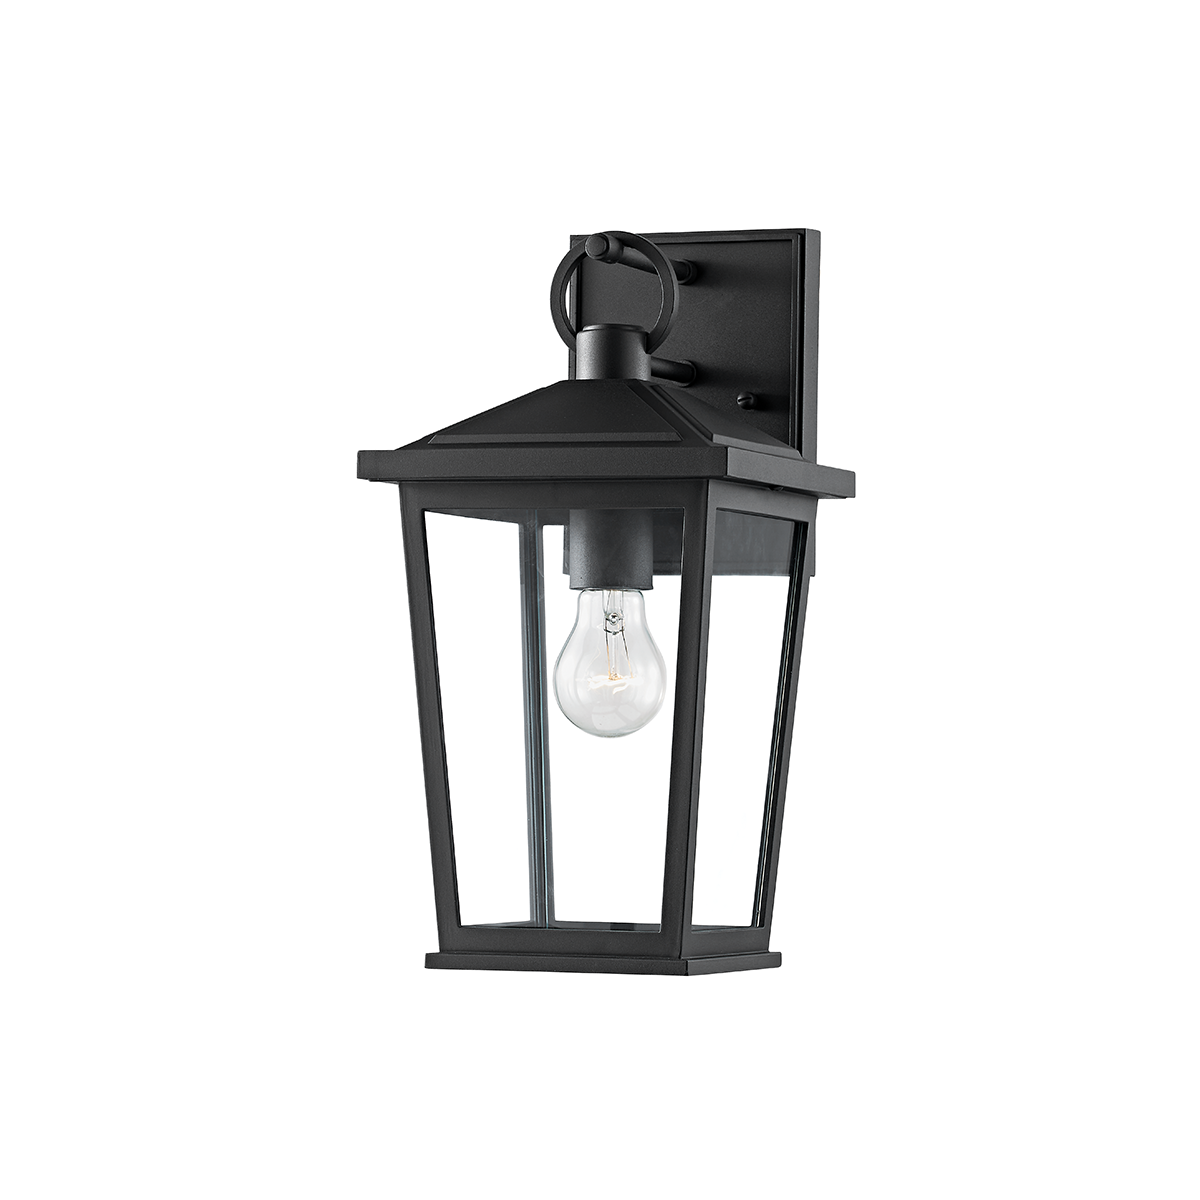 Troy Lighting 1 LIGHT SMALL EXTERIOR WALL SCONCE B8901